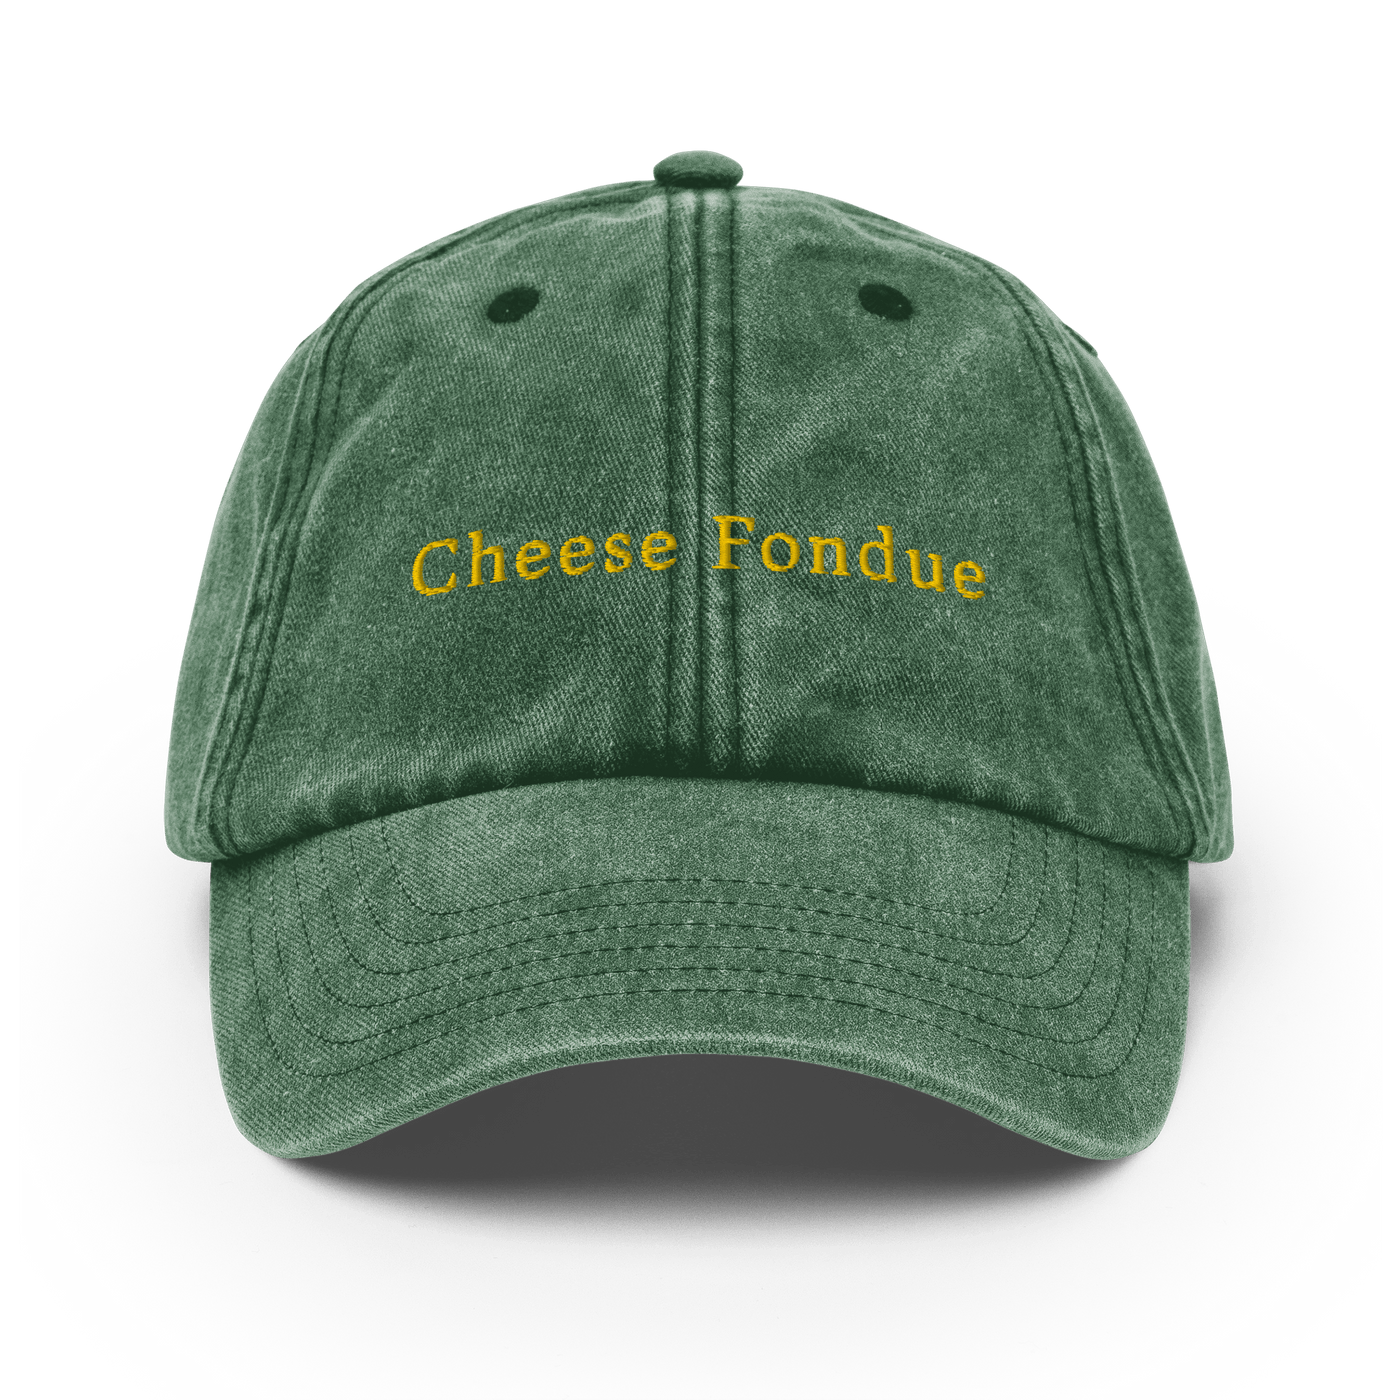 Cheese Fondue Vintage Hat - Vintage Bottle Green - - Just Another Cap Store